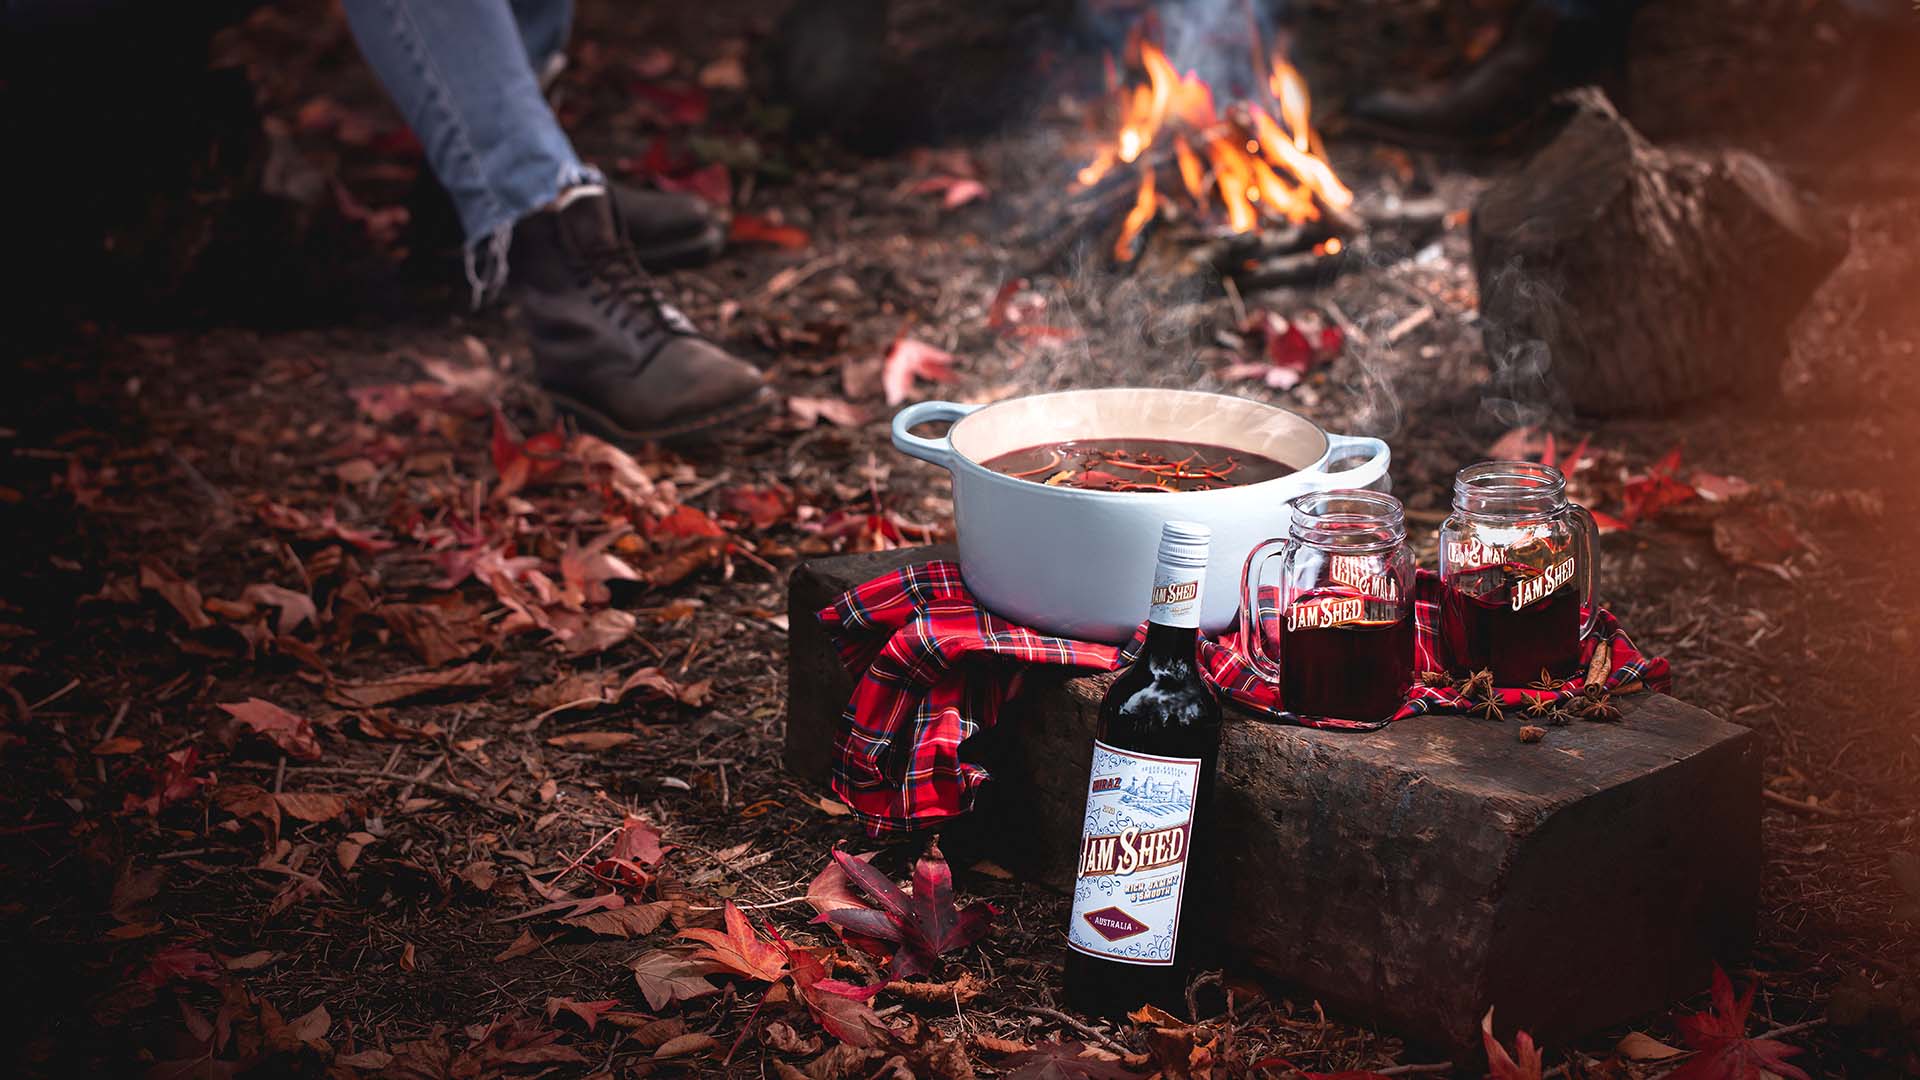 You Can Now Pick Up DIY Mulled Wine Kits to Steam Up Your Winter